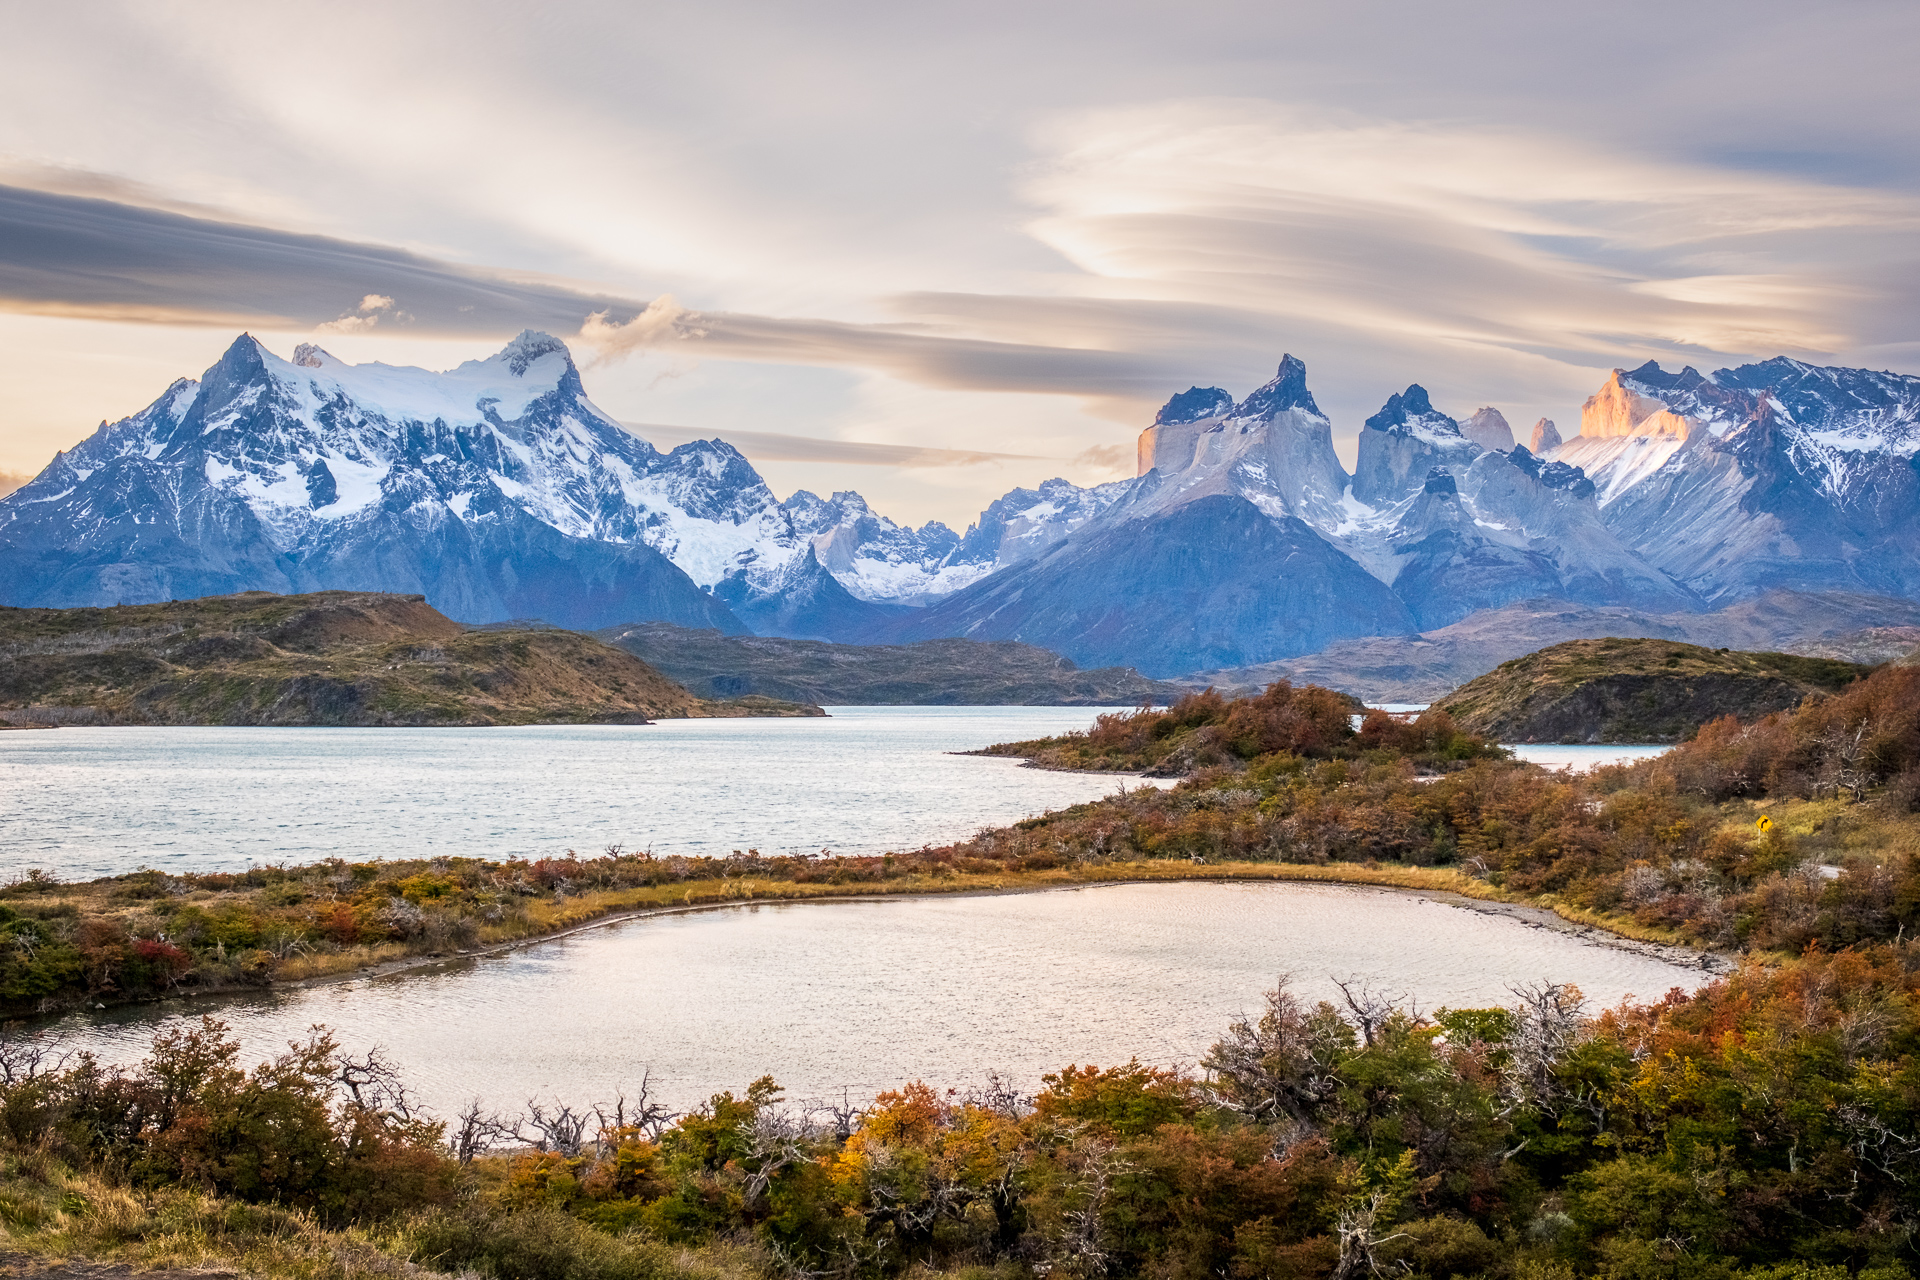 Torres del Paine mountain range before sunset.